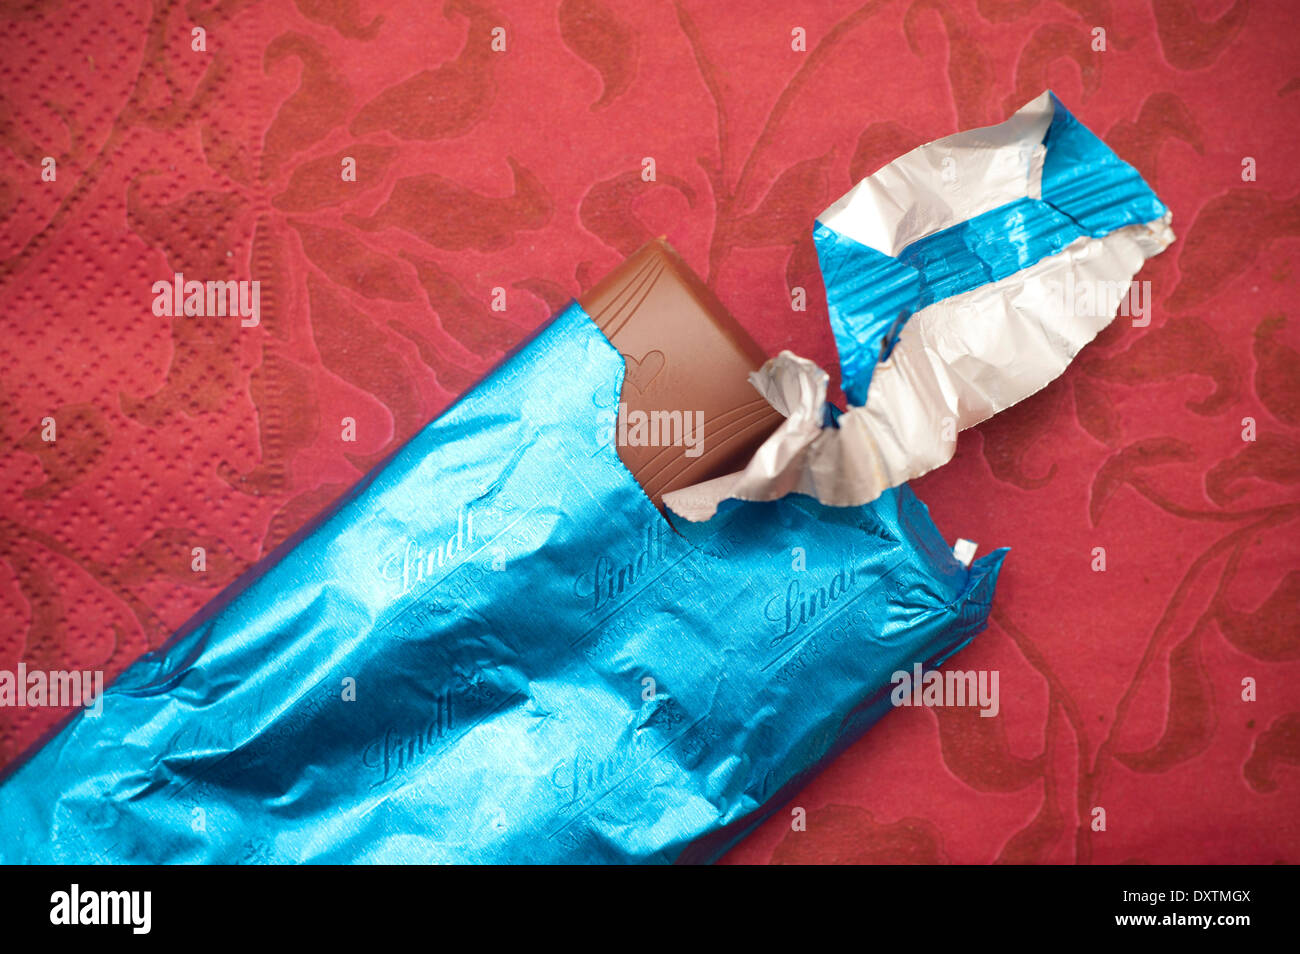 tablet of Lindt chocolate just unpacked Stock Photo